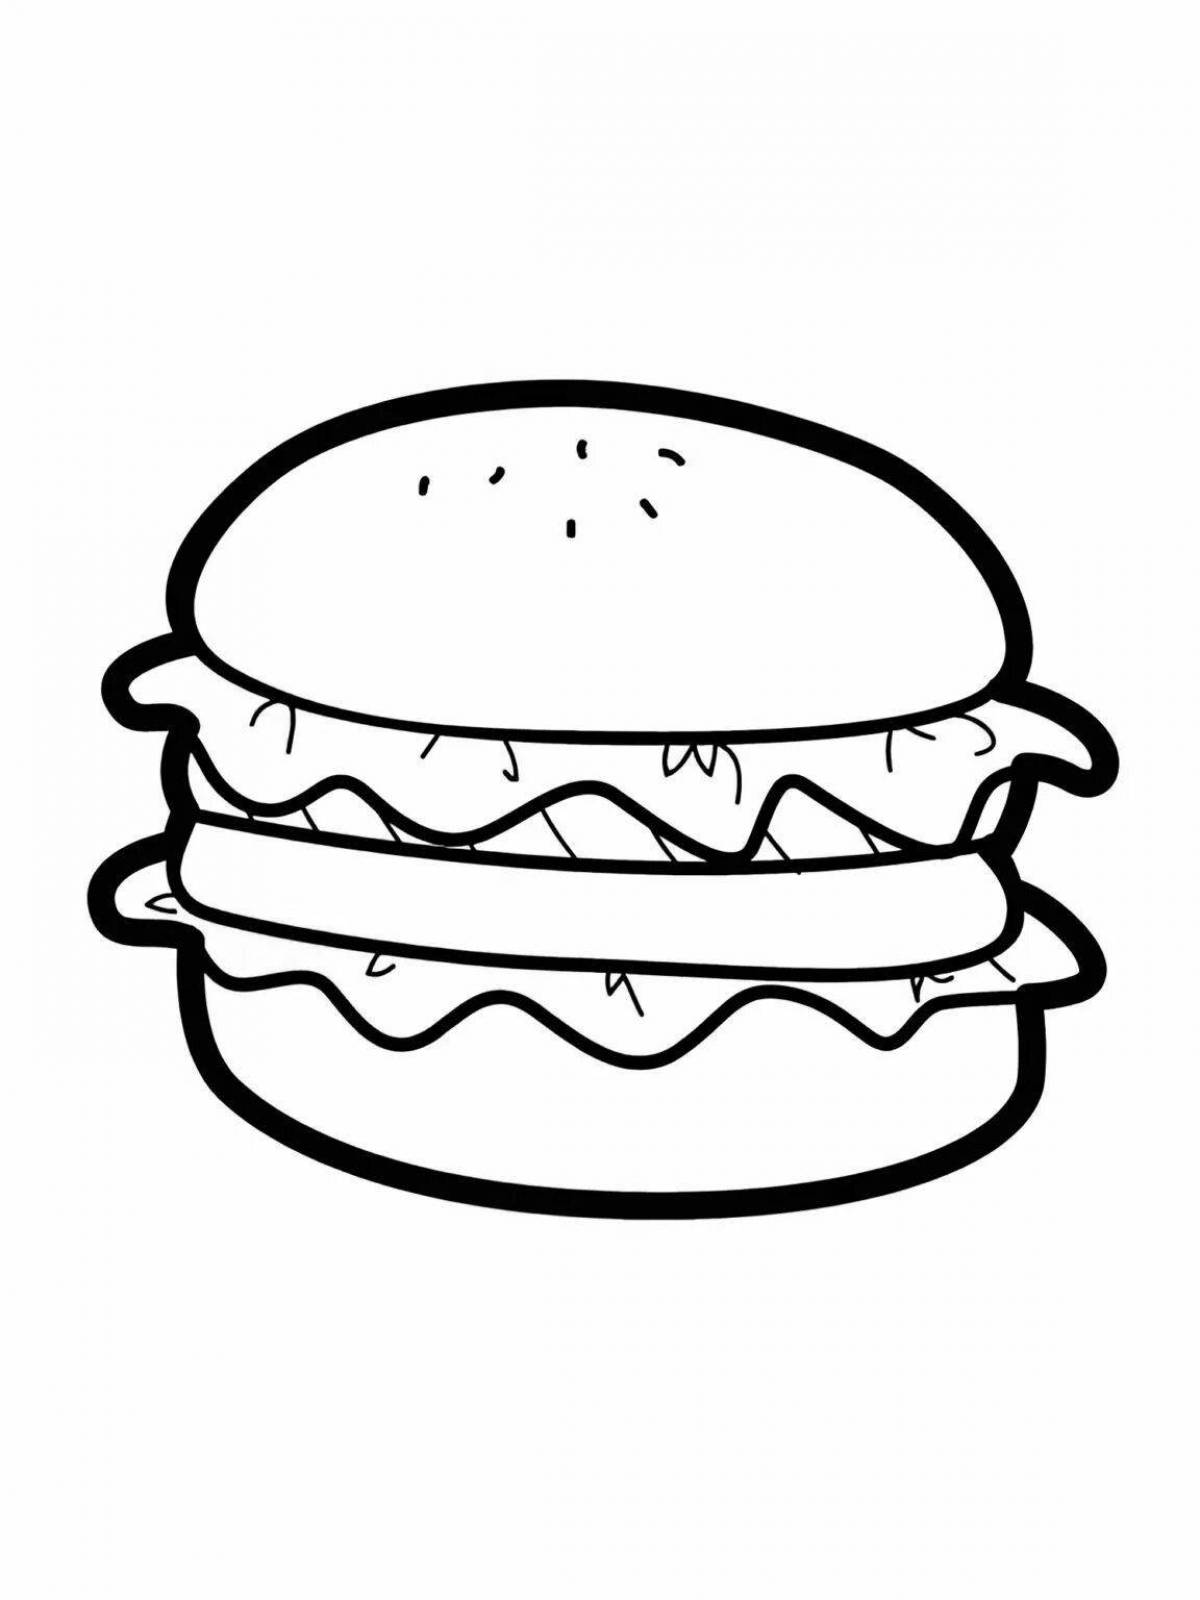 Attractive cheeseburger coloring page